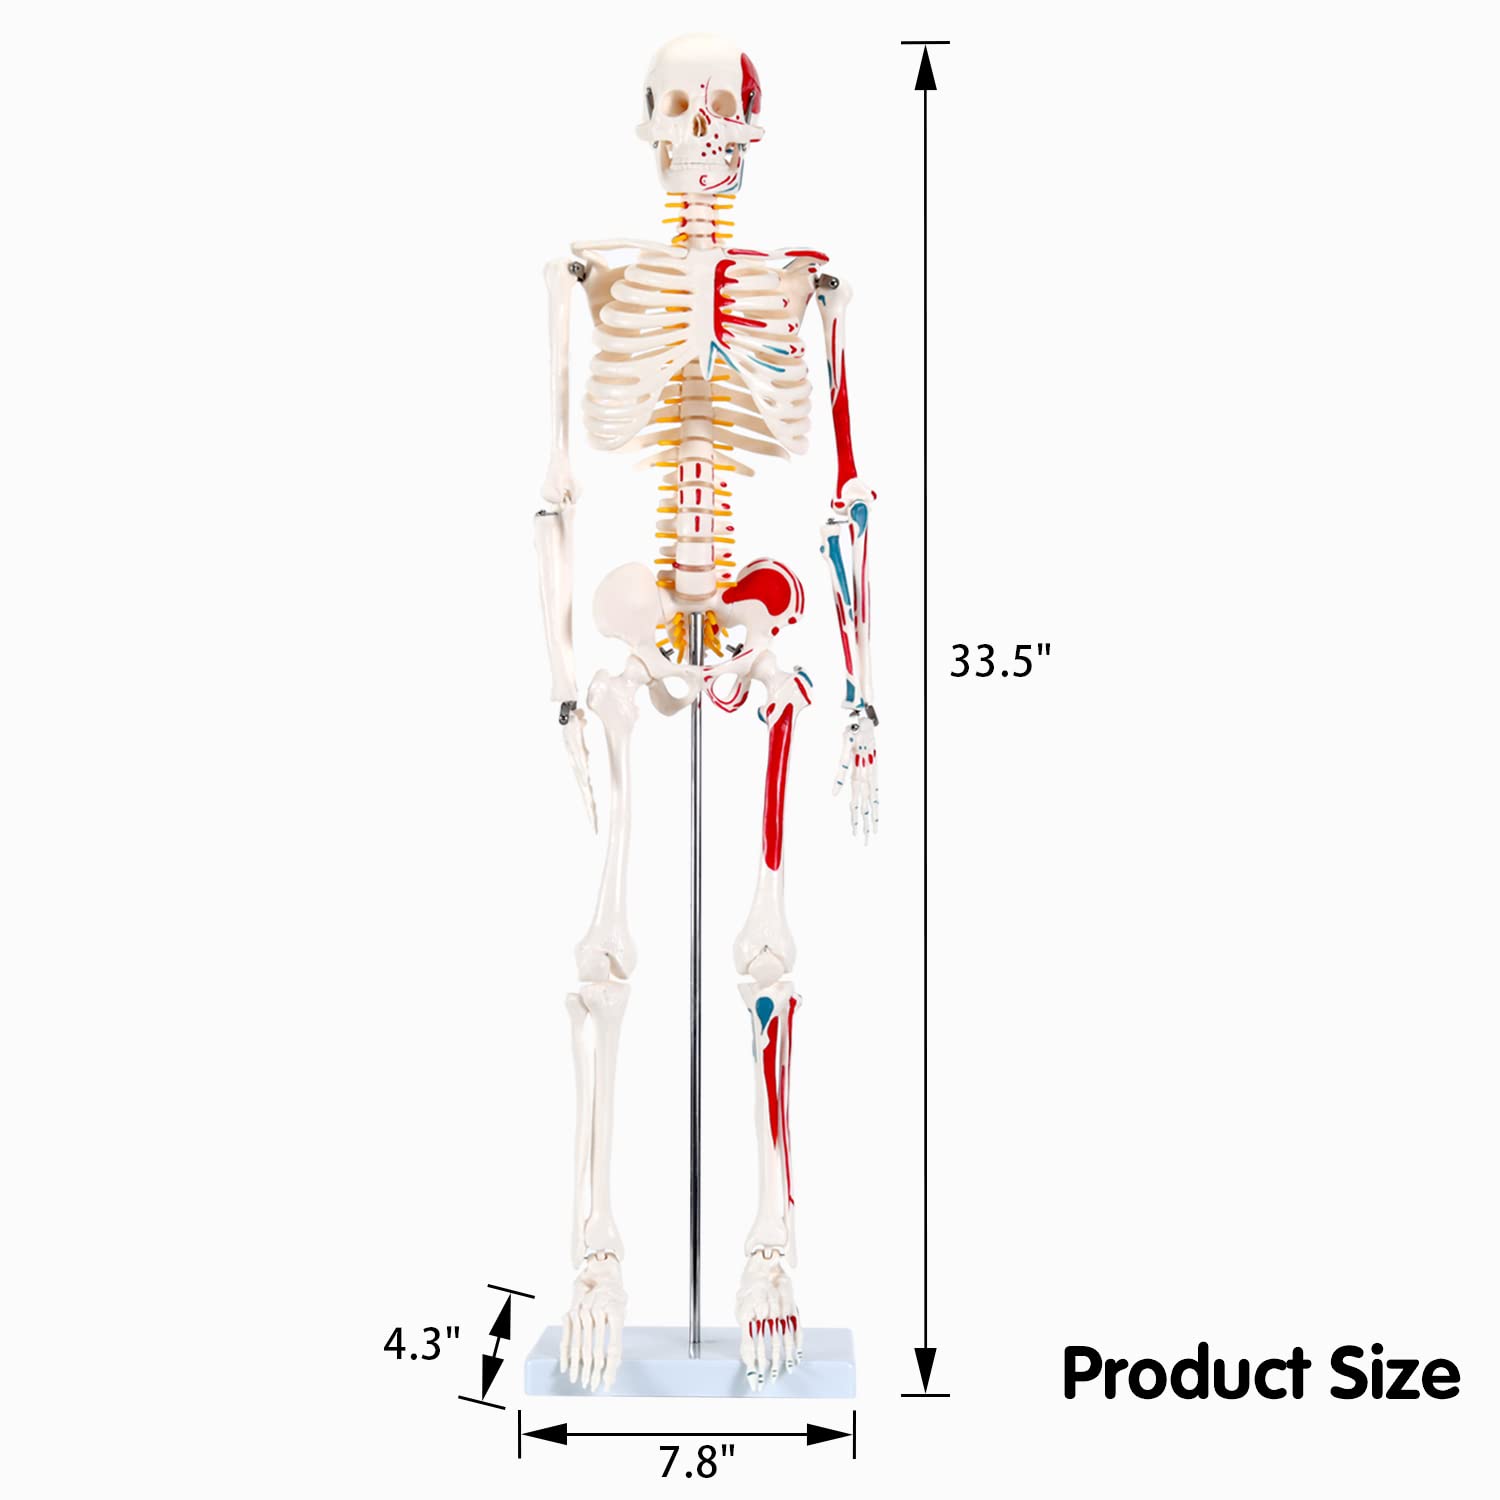 RONTEN 33.5" Human Skeleton Model 1/2 Life Size Skeleton Anatomy Model with Painted and Muscle Origins and Ends Points